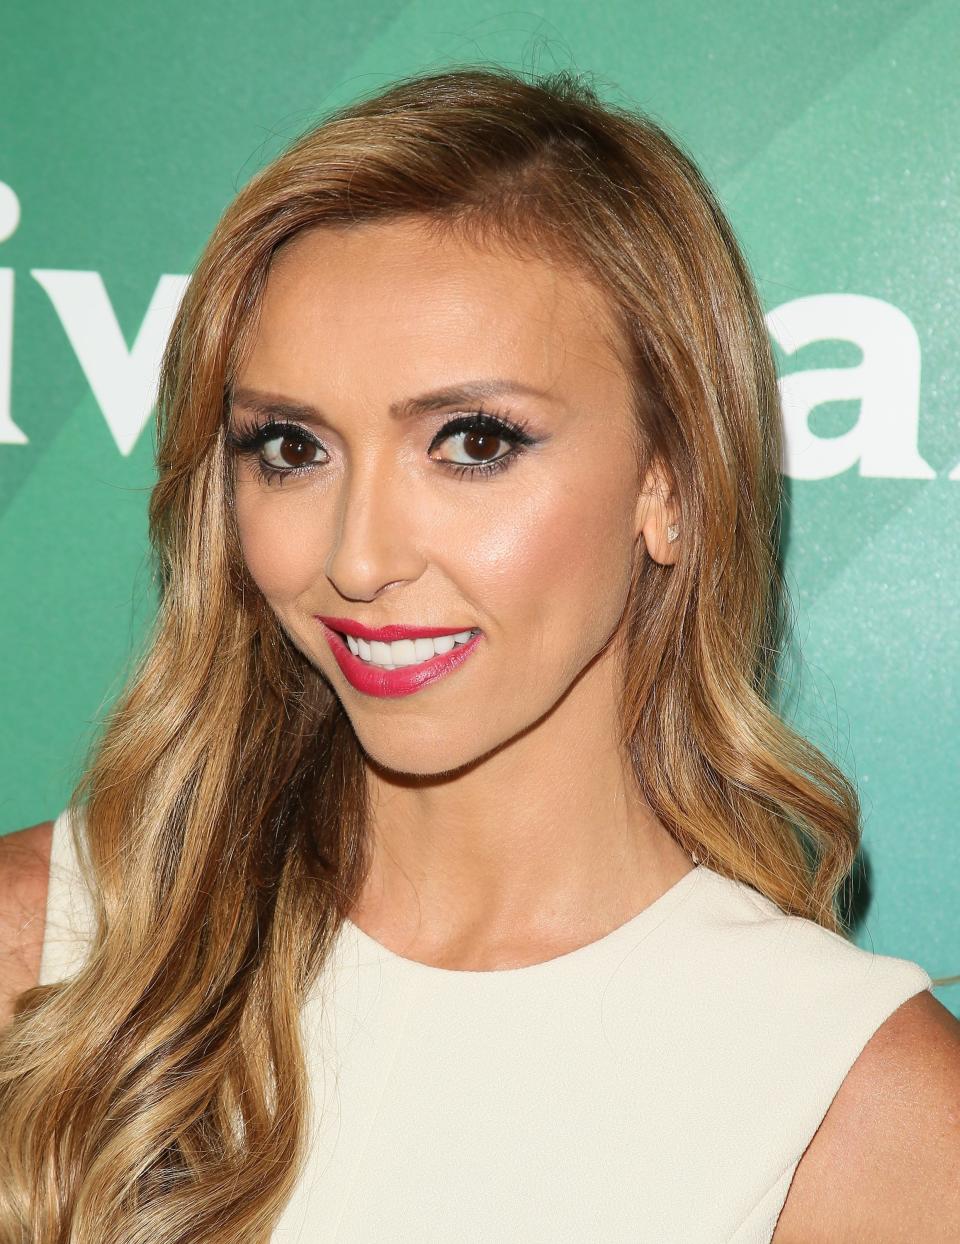 In 2010, Giuliana Rancic suffered&nbsp;a miscarriage at nine weeks.&nbsp;"I was angry at life and at God," <a href="http://www.people.com/people/article/0,,20430462,00.html">she told People.</a>&nbsp;<br /><br />The talk show host said she&nbsp;wanted to share her fertility struggles with others.&nbsp;"Hopefully we can help people understand that there's nothing to be ashamed of," she said. "It's such a taboo subject, but it's a very common problem."